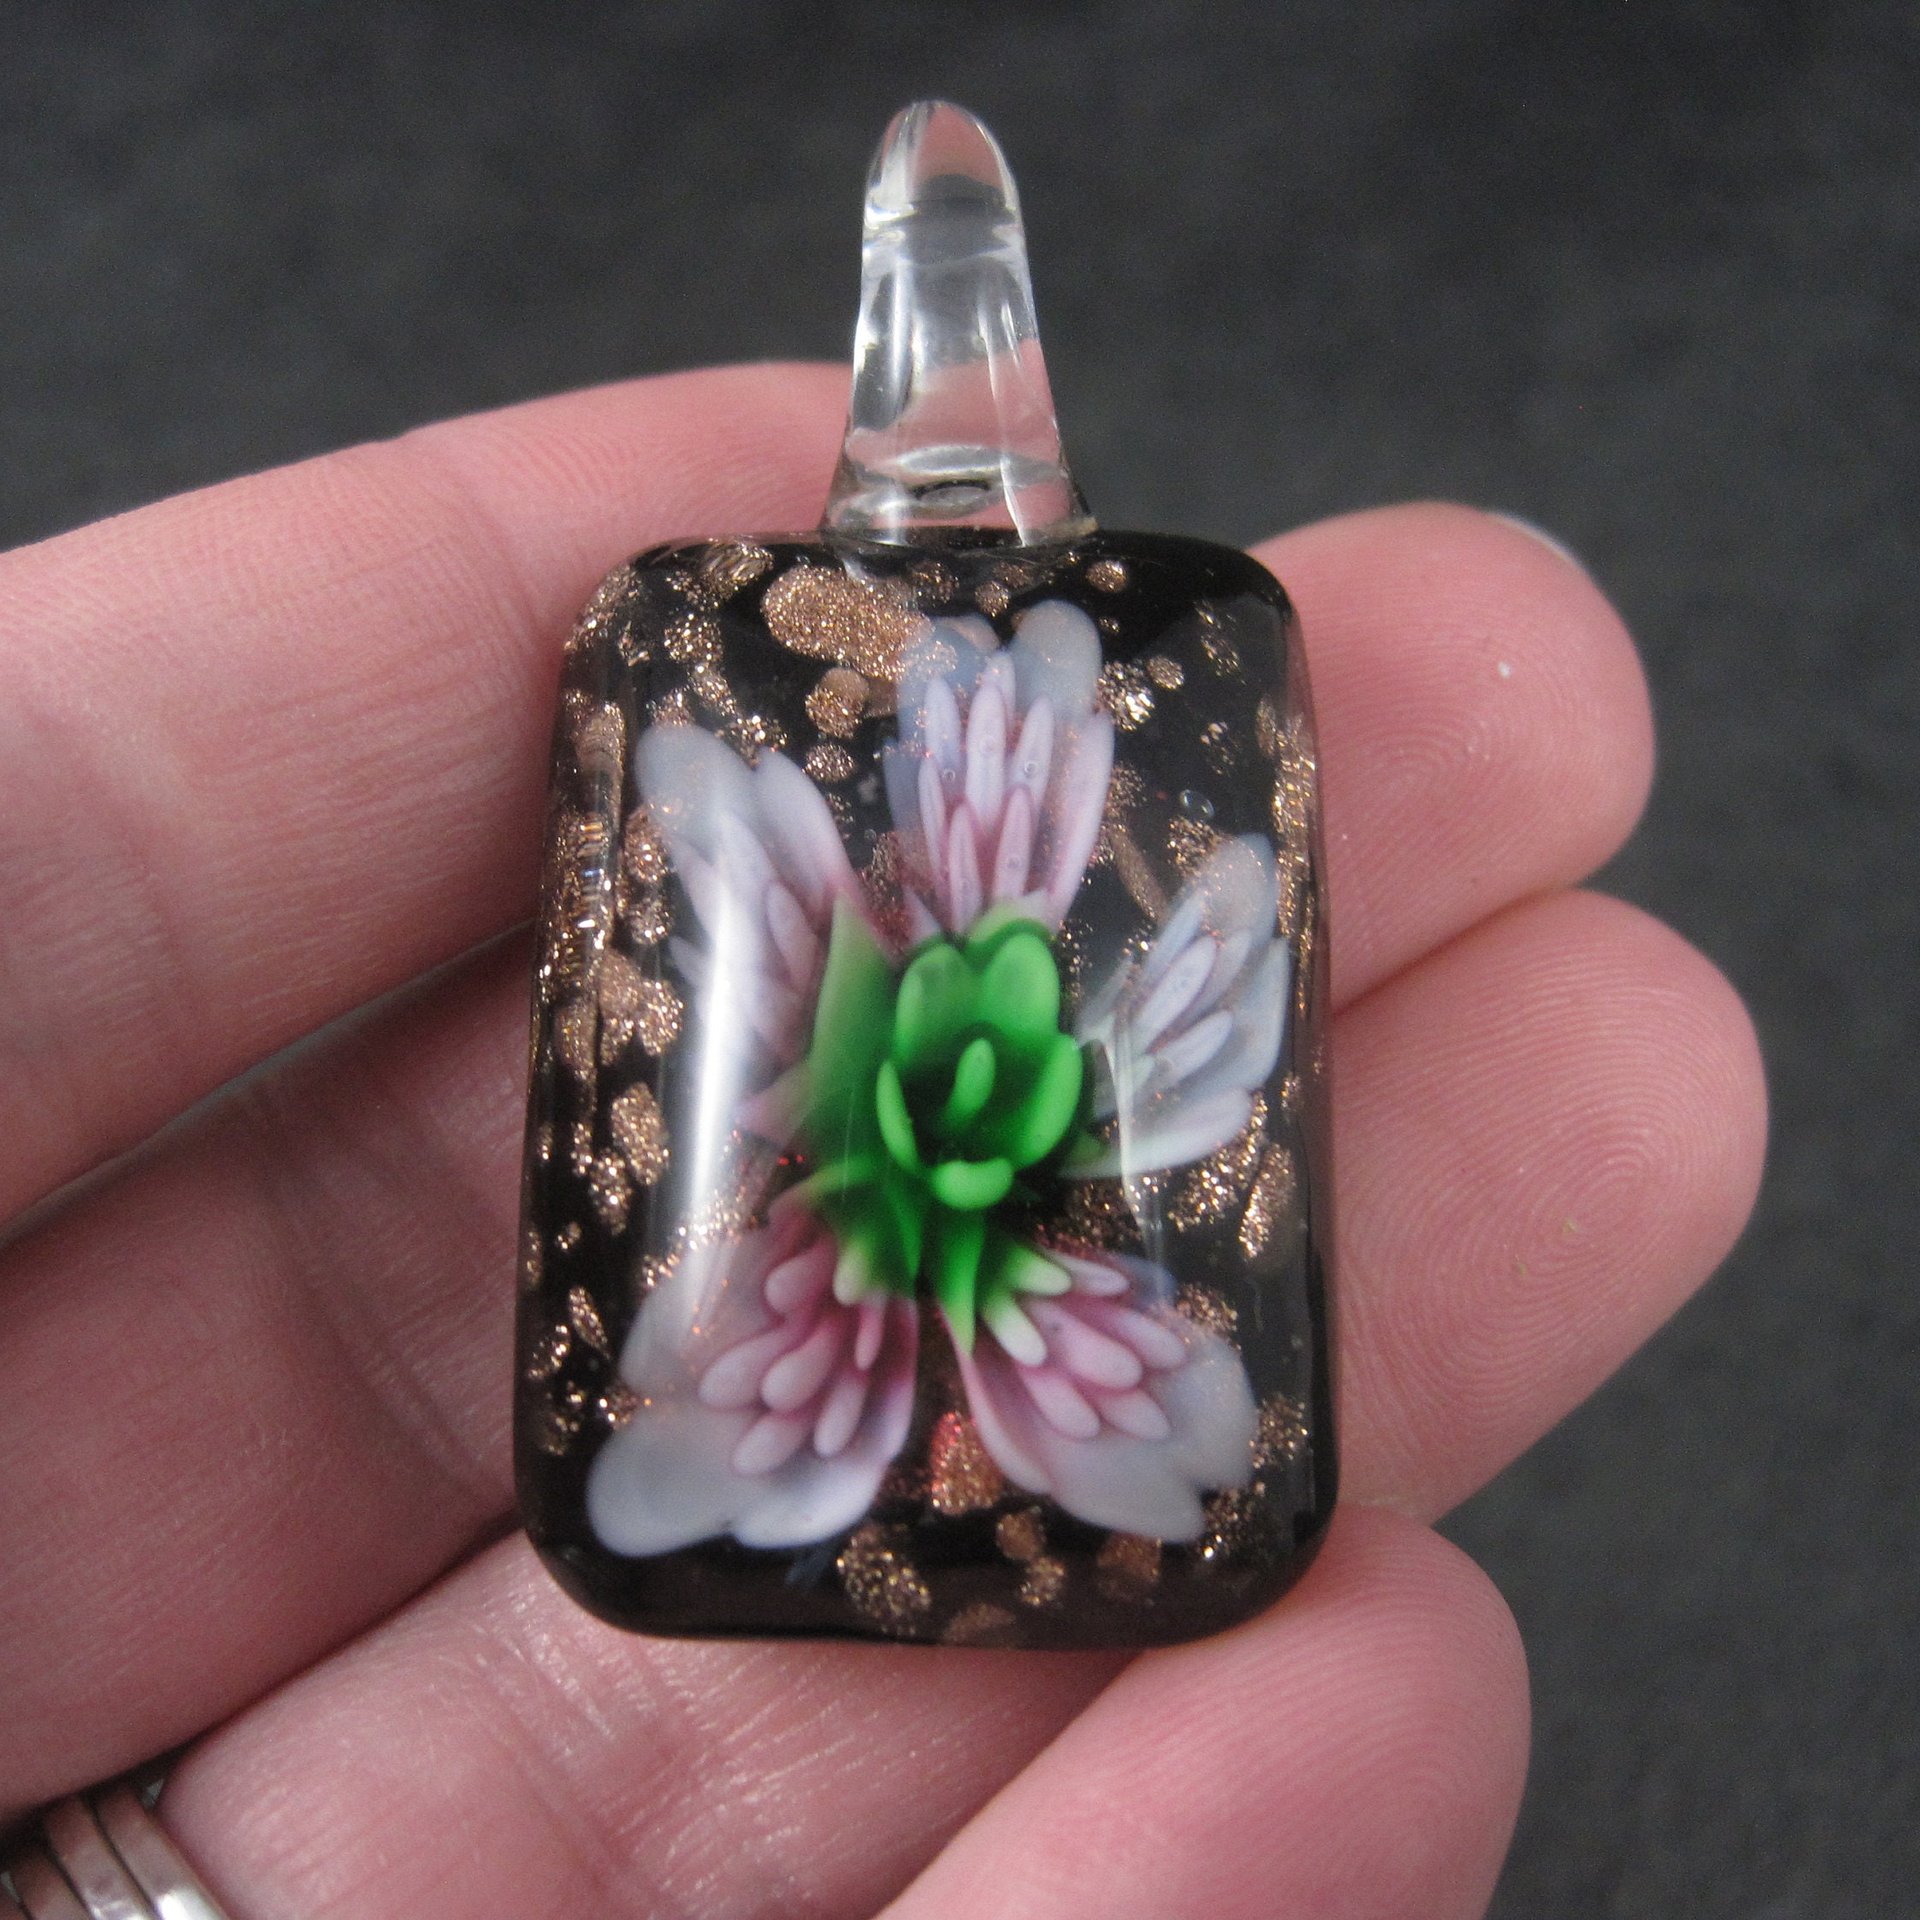 Vintage Pink Floral Murano Style Art Glass Pendant